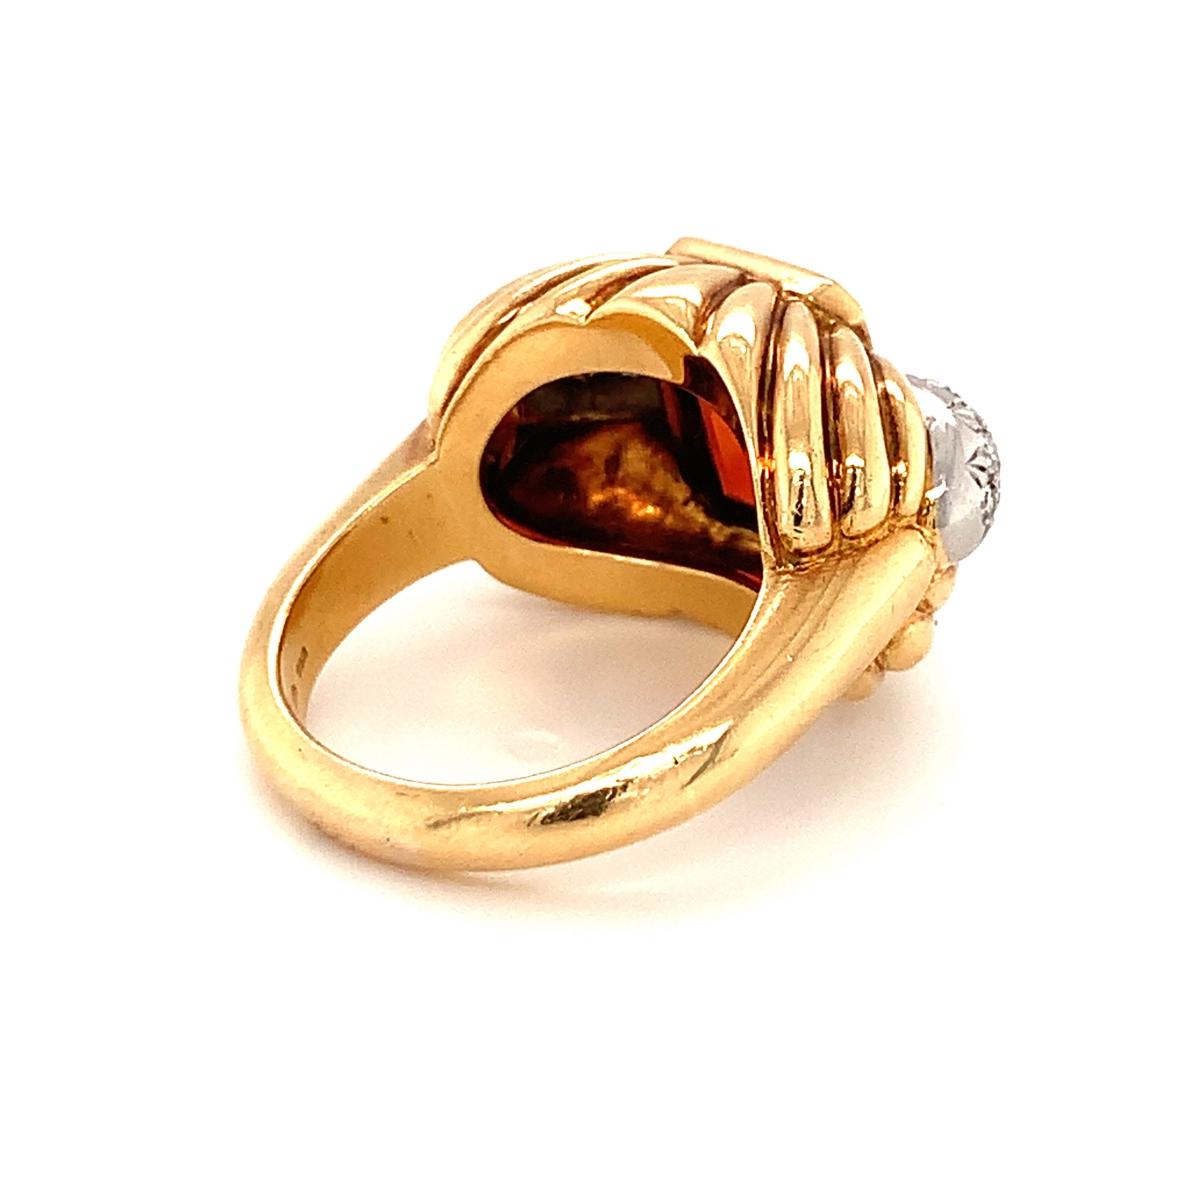 Women's Madeira Citrine Ring in 18K Yellow Gold, circa 1940s For Sale